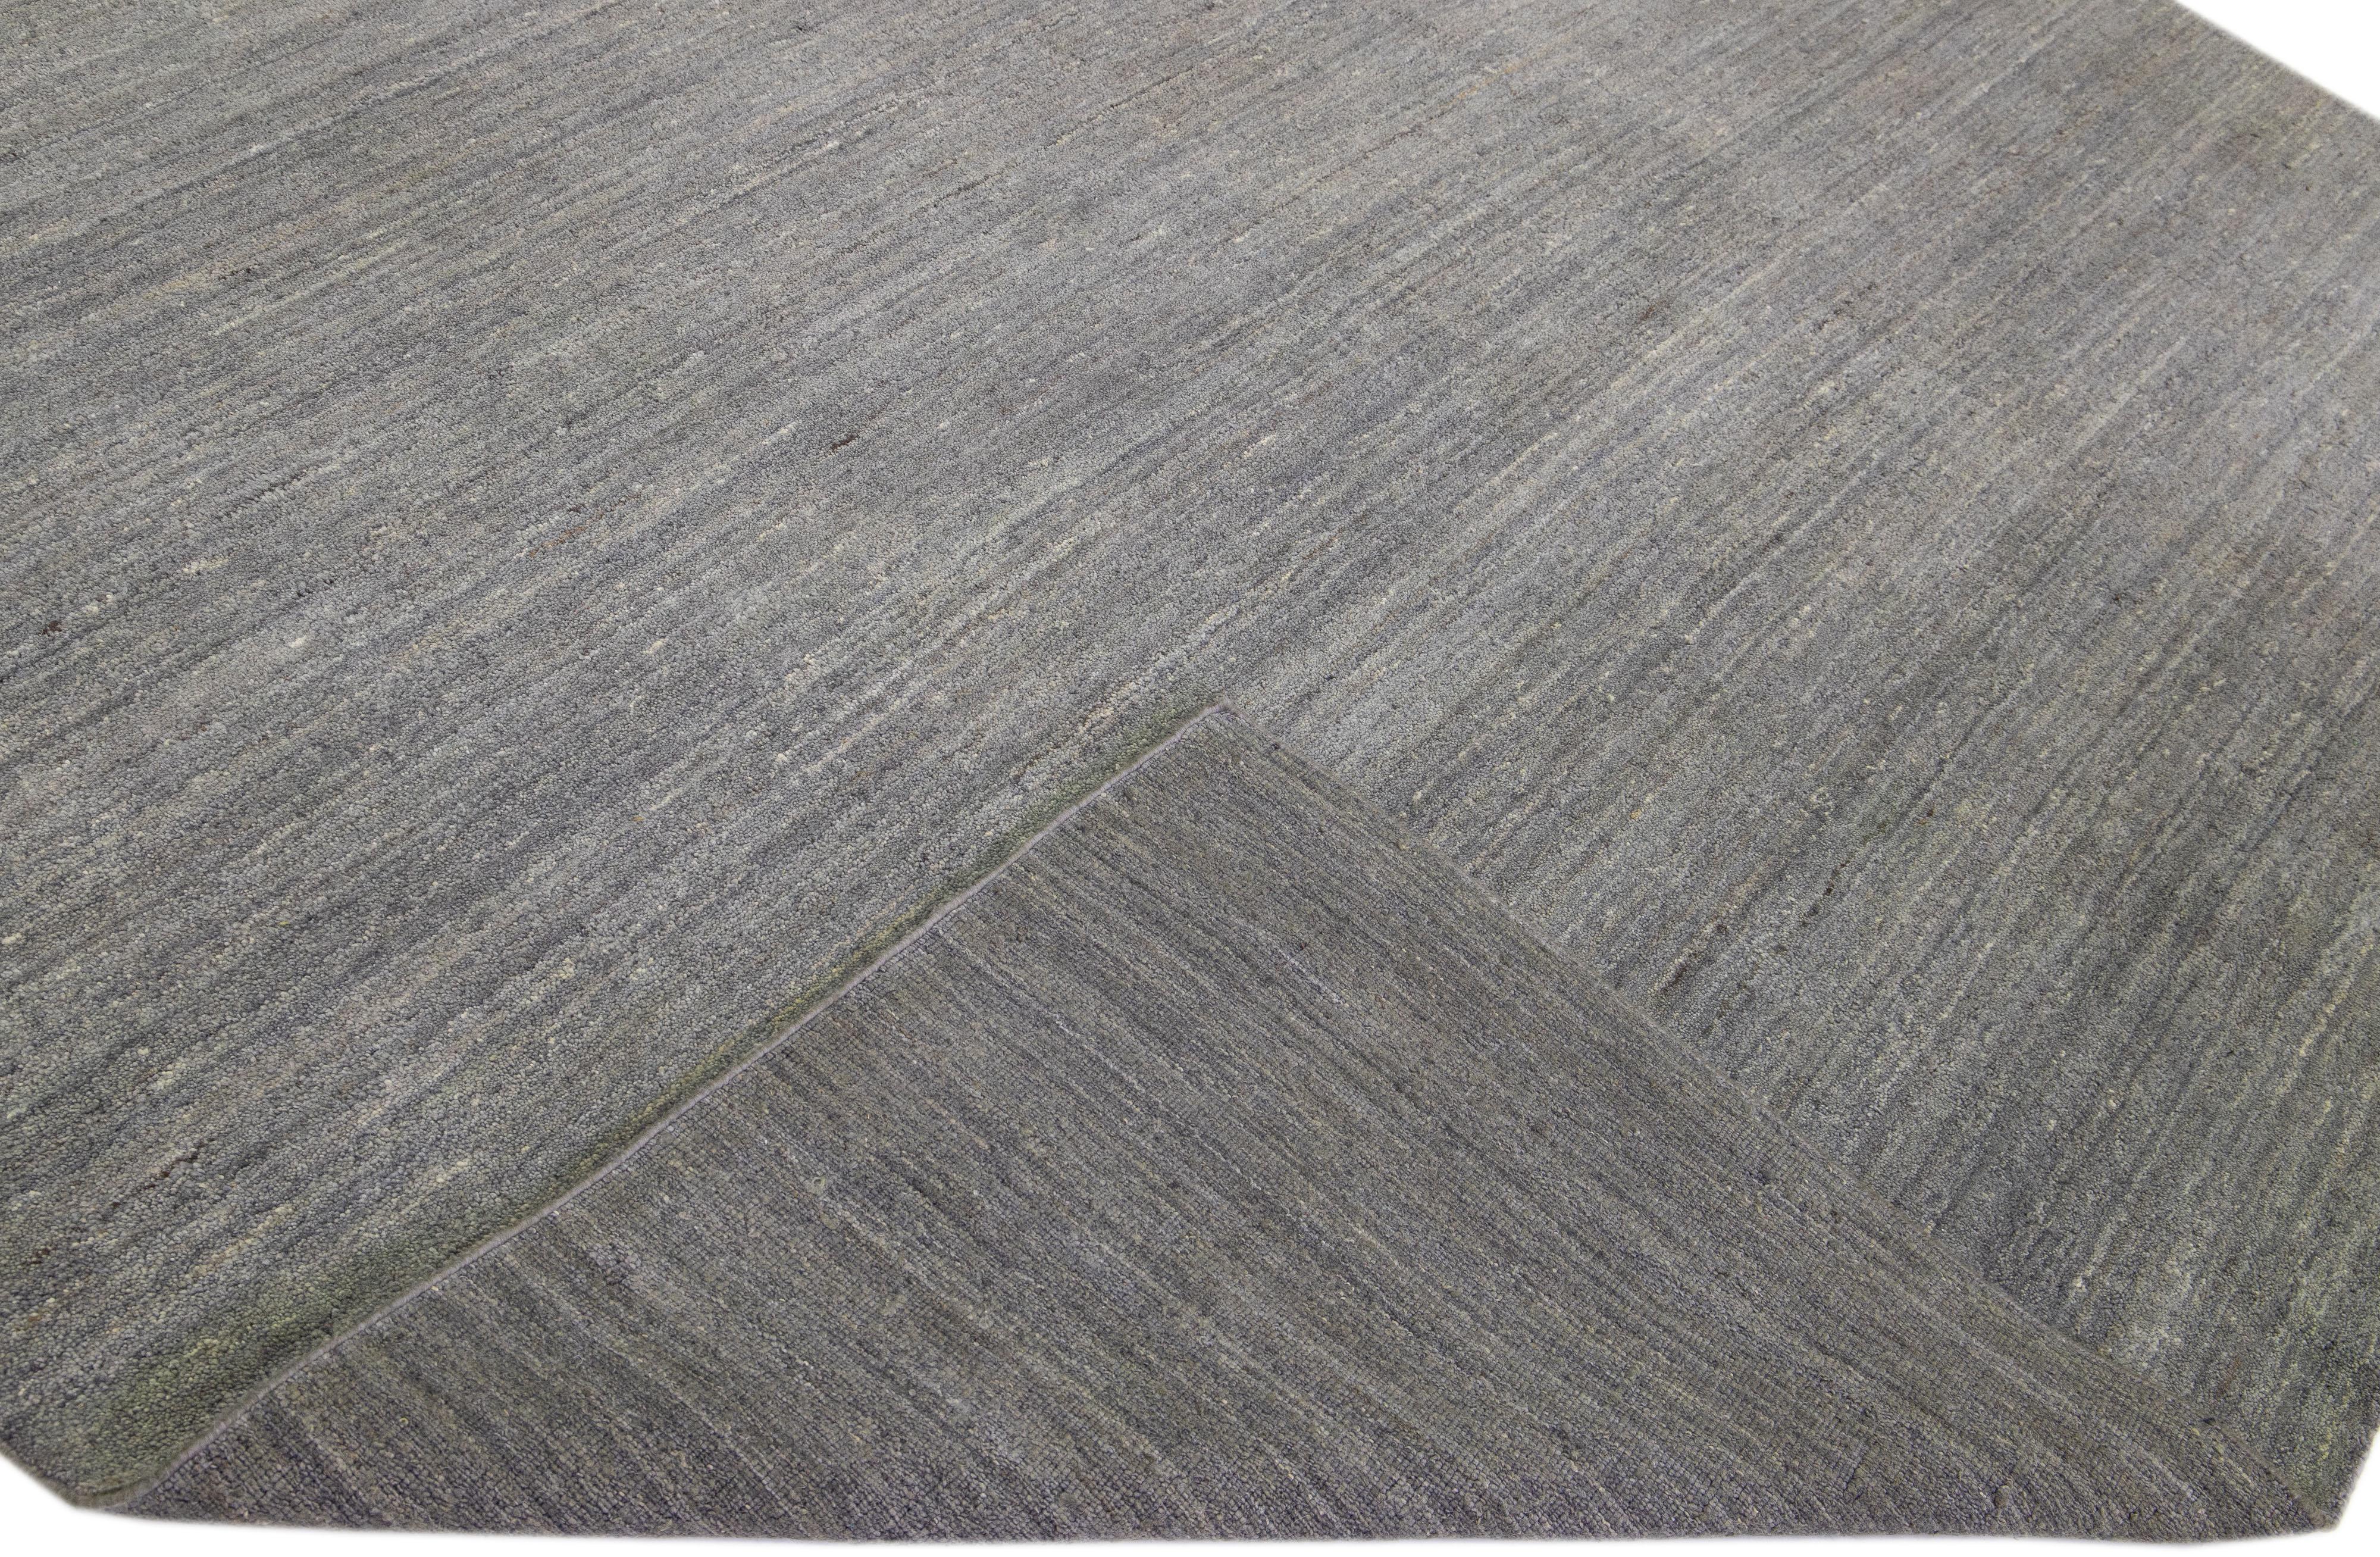 Beautiful modern Gabbeh style hand-knotted wool rug with a grey field in a gorgeous solid design.

This rug measures: 9'11